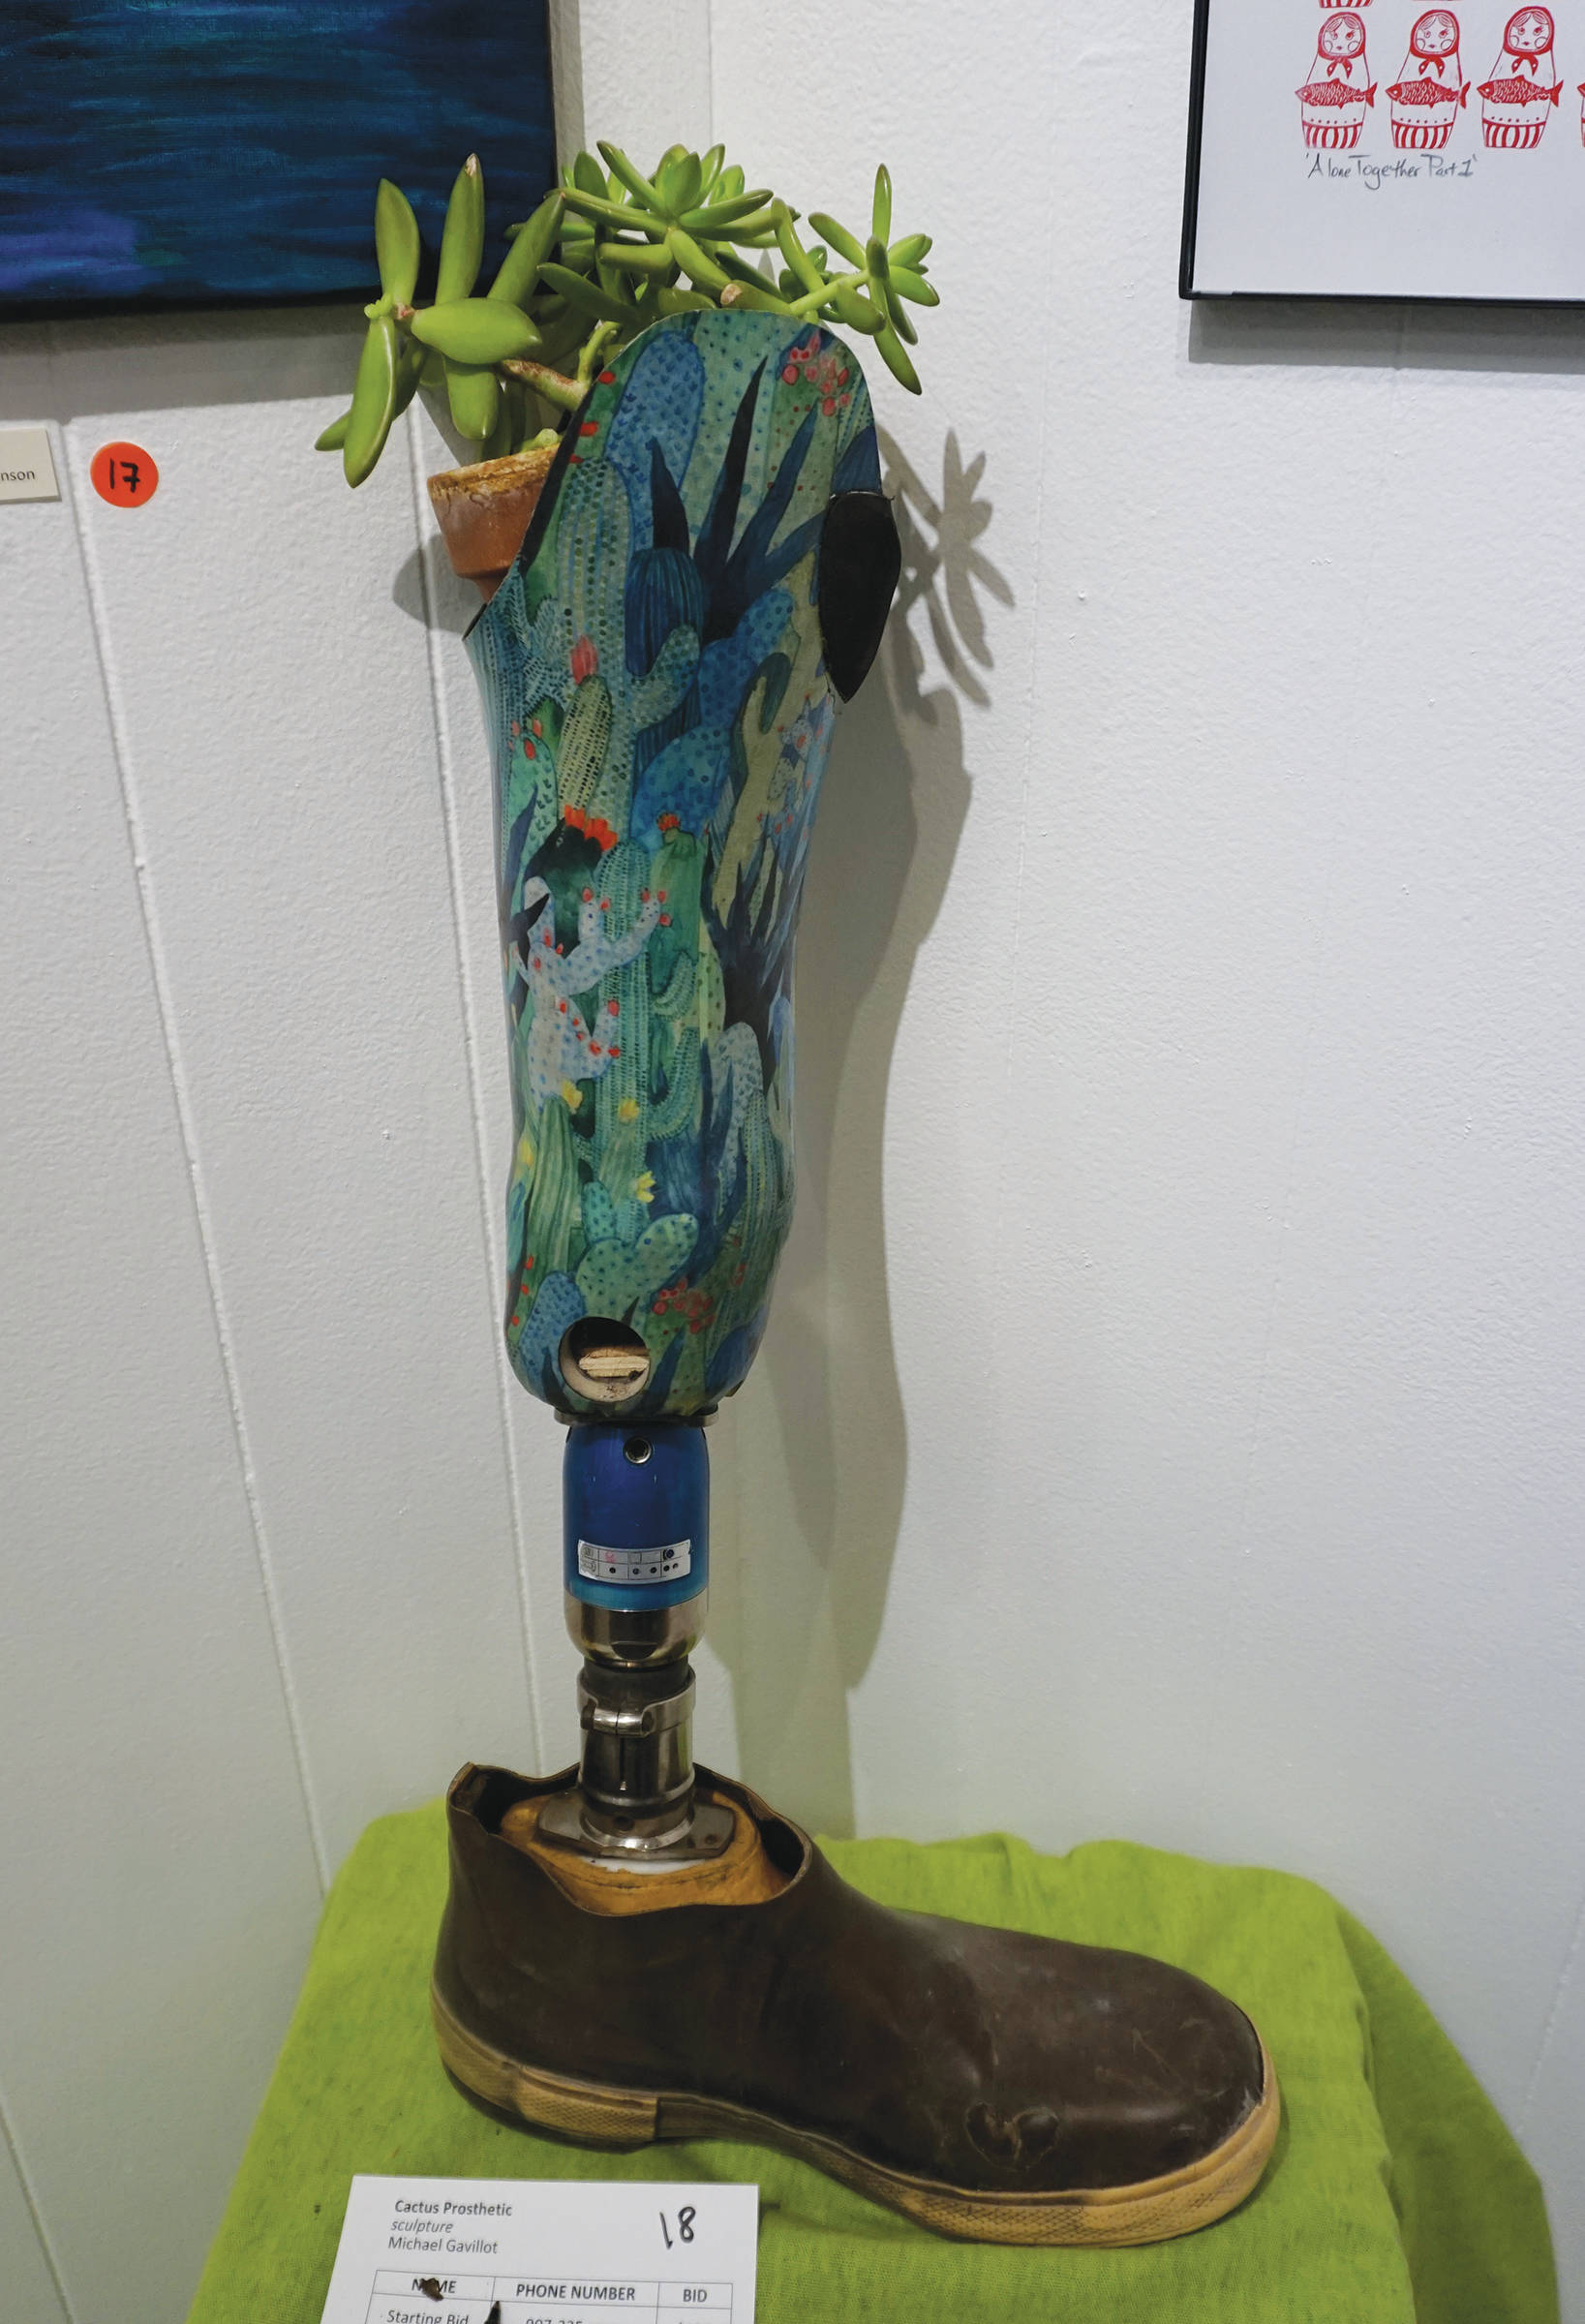 Michael Gavillot’s decorated prosthetic leg, as seen at First Friday on March 6, 2020, at the Disability Art Show at the Homer Council on the Arts in Homer, Alaska. (Photo by Michael Armstrong/Homer News)